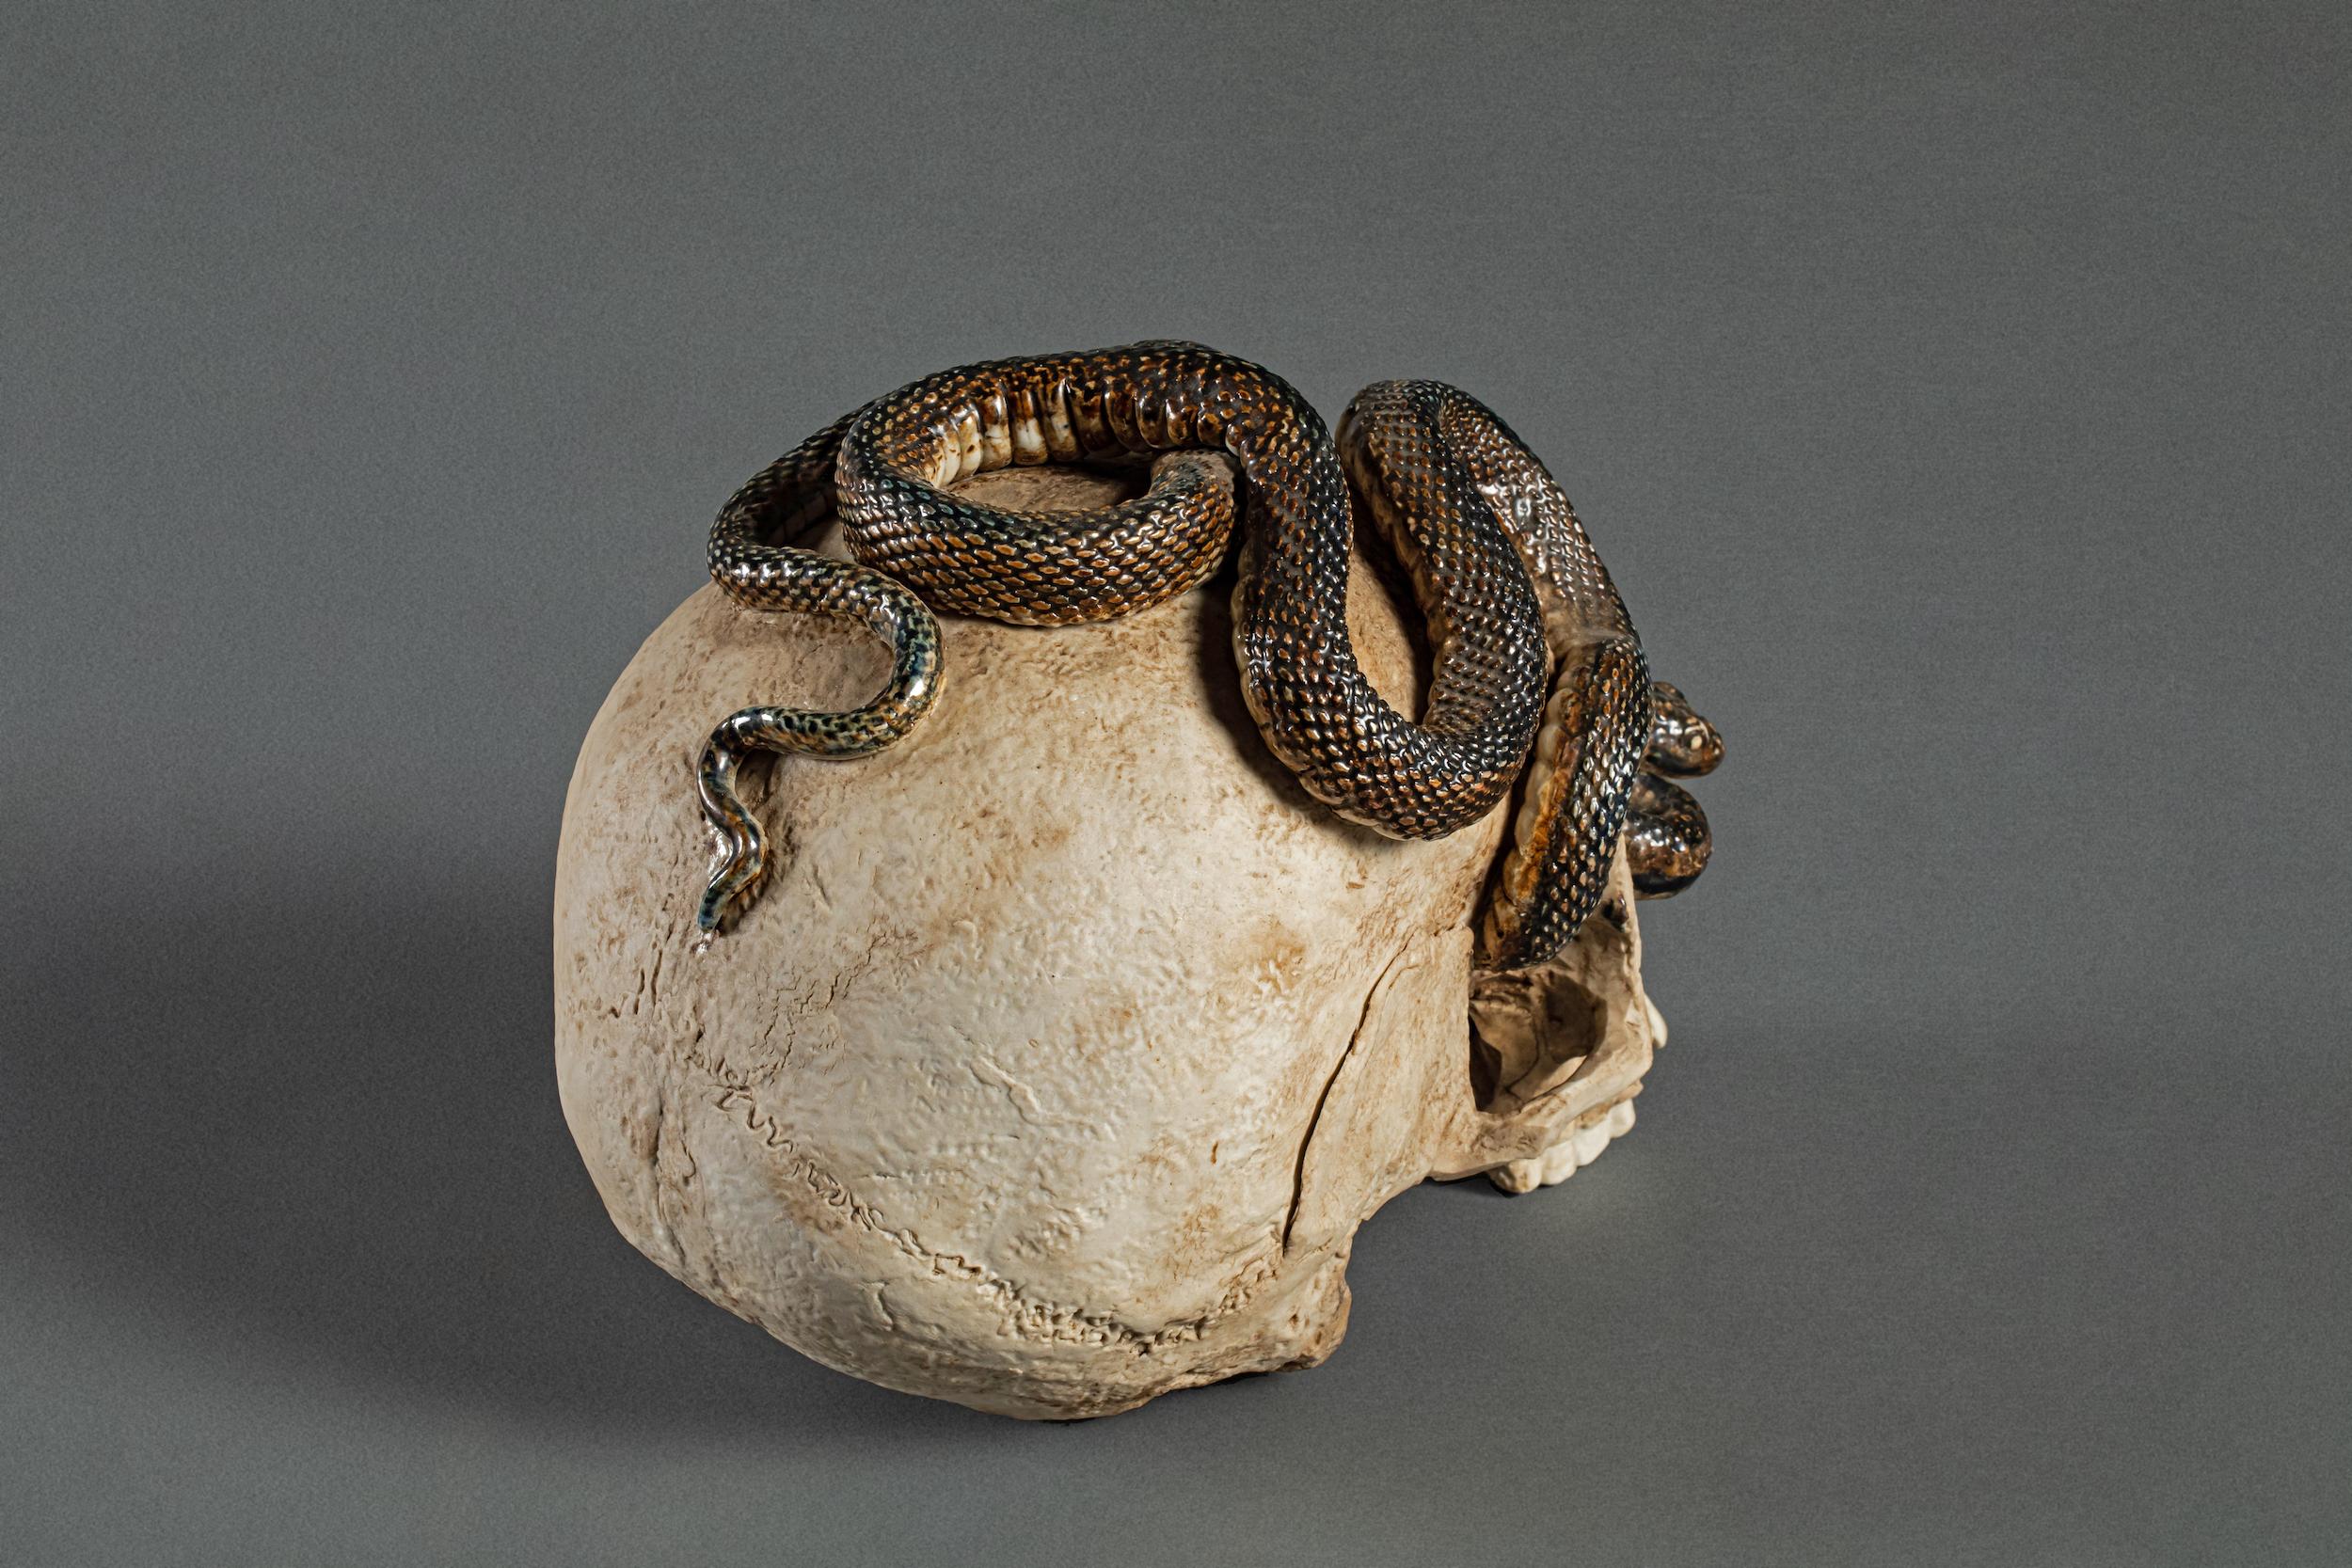 20th Century Japanese Ceramic Form of a Human Skull with a Snake For Sale